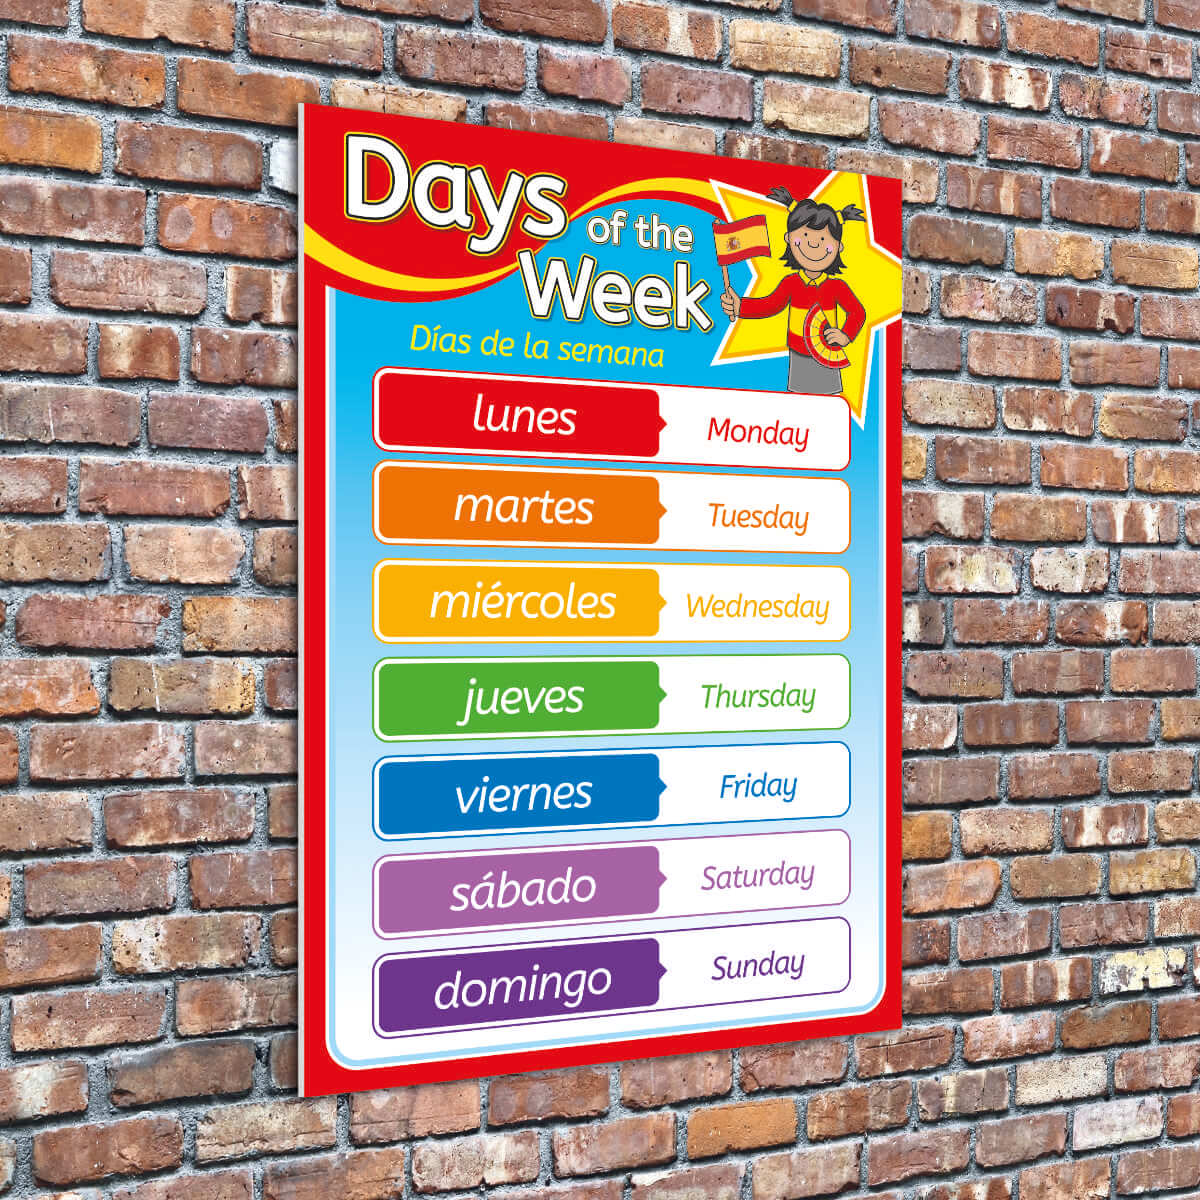 spanish-days-of-the-week-sign-illustrated-languages-sign-for-schools